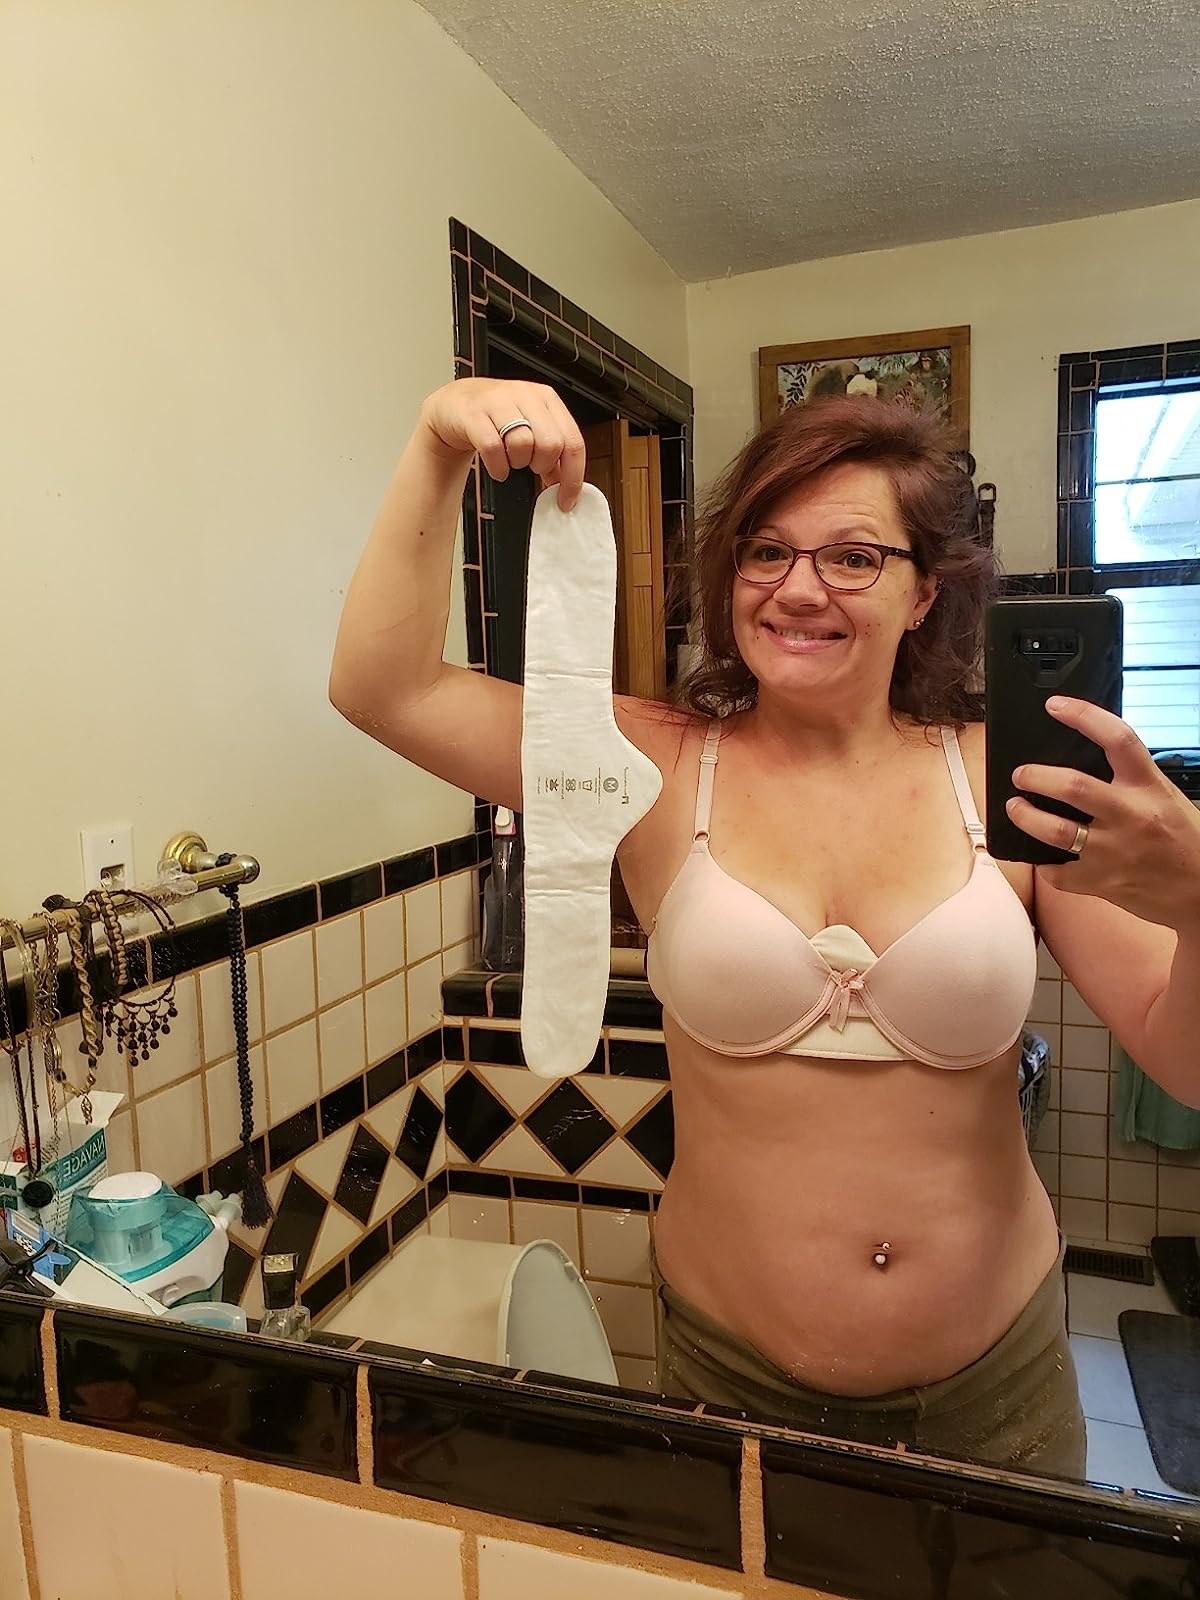 Reviewer with liner under bra and holding up another white liner in hand